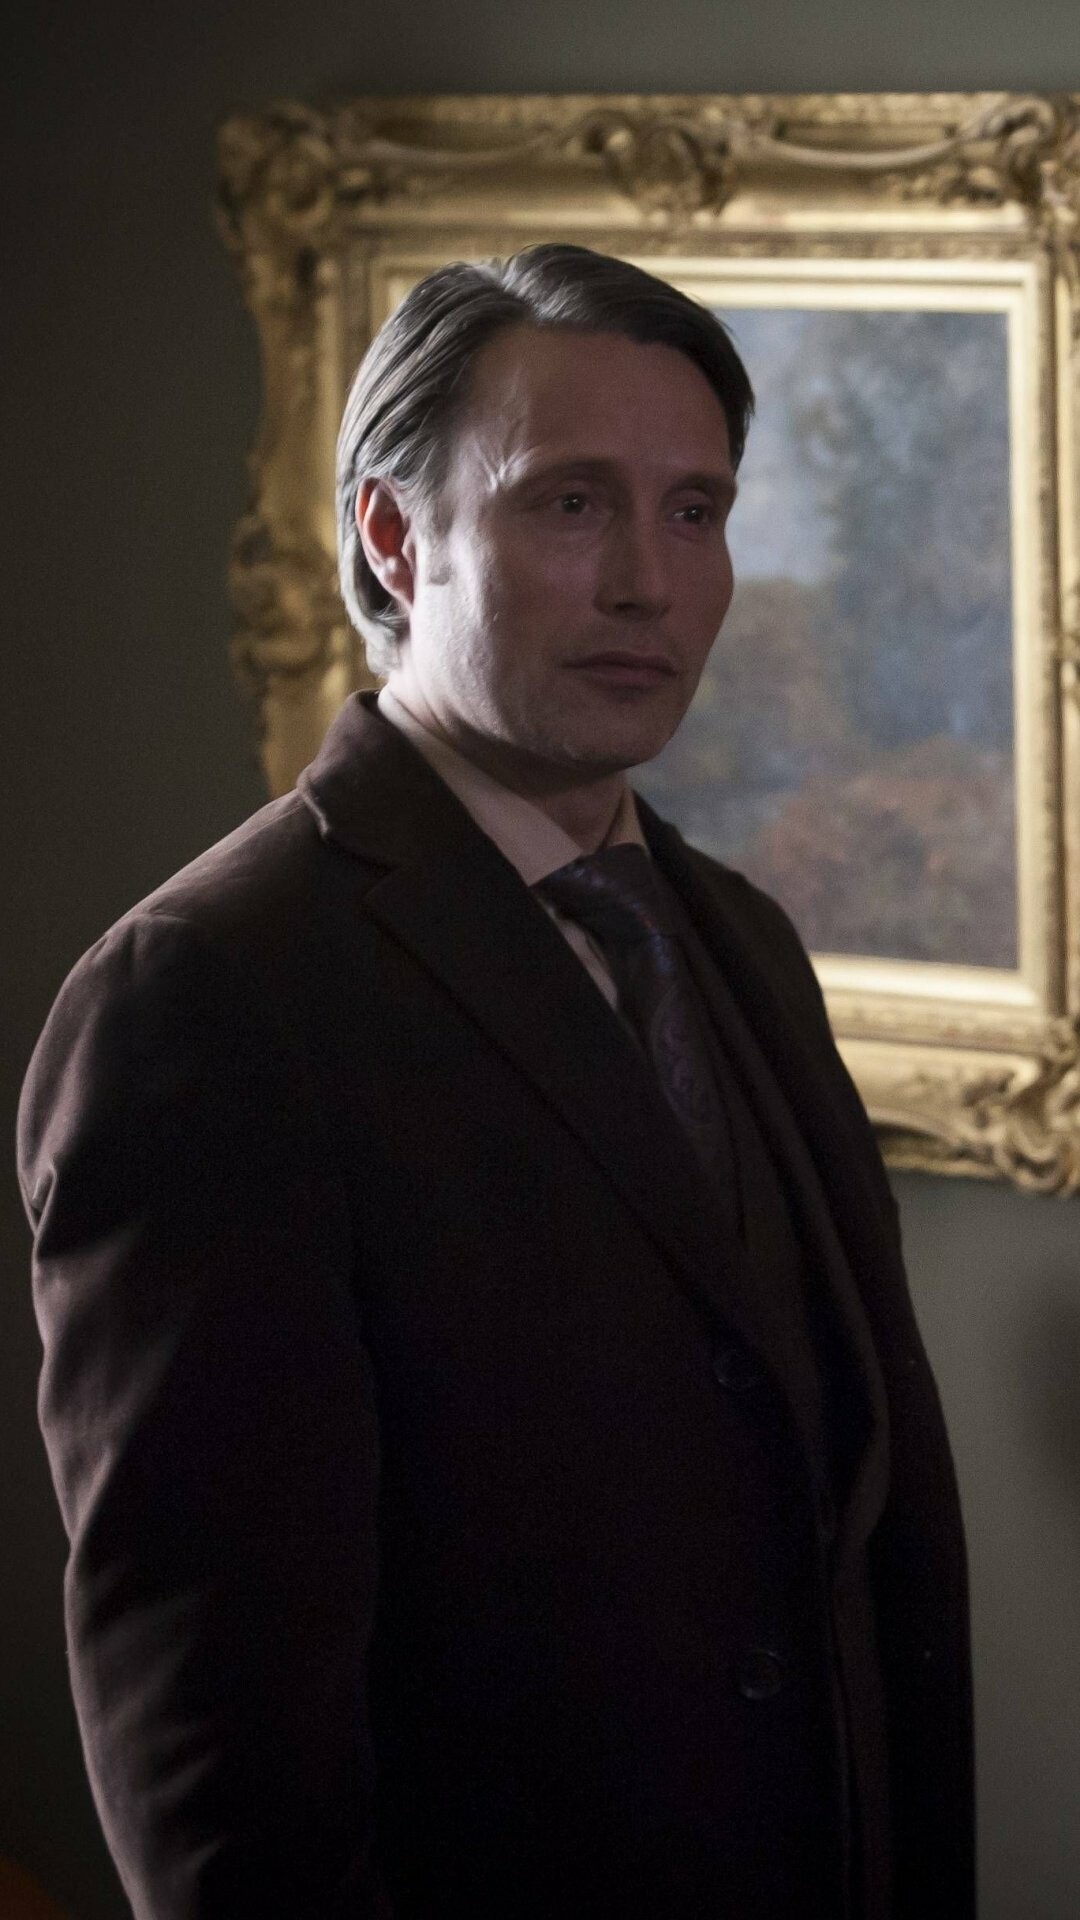 Hannibal (TV Series): TV show, Dr. Lecter, a cannibalistic serial killer, who works behind Graham's back. 1080x1920 Full HD Background.